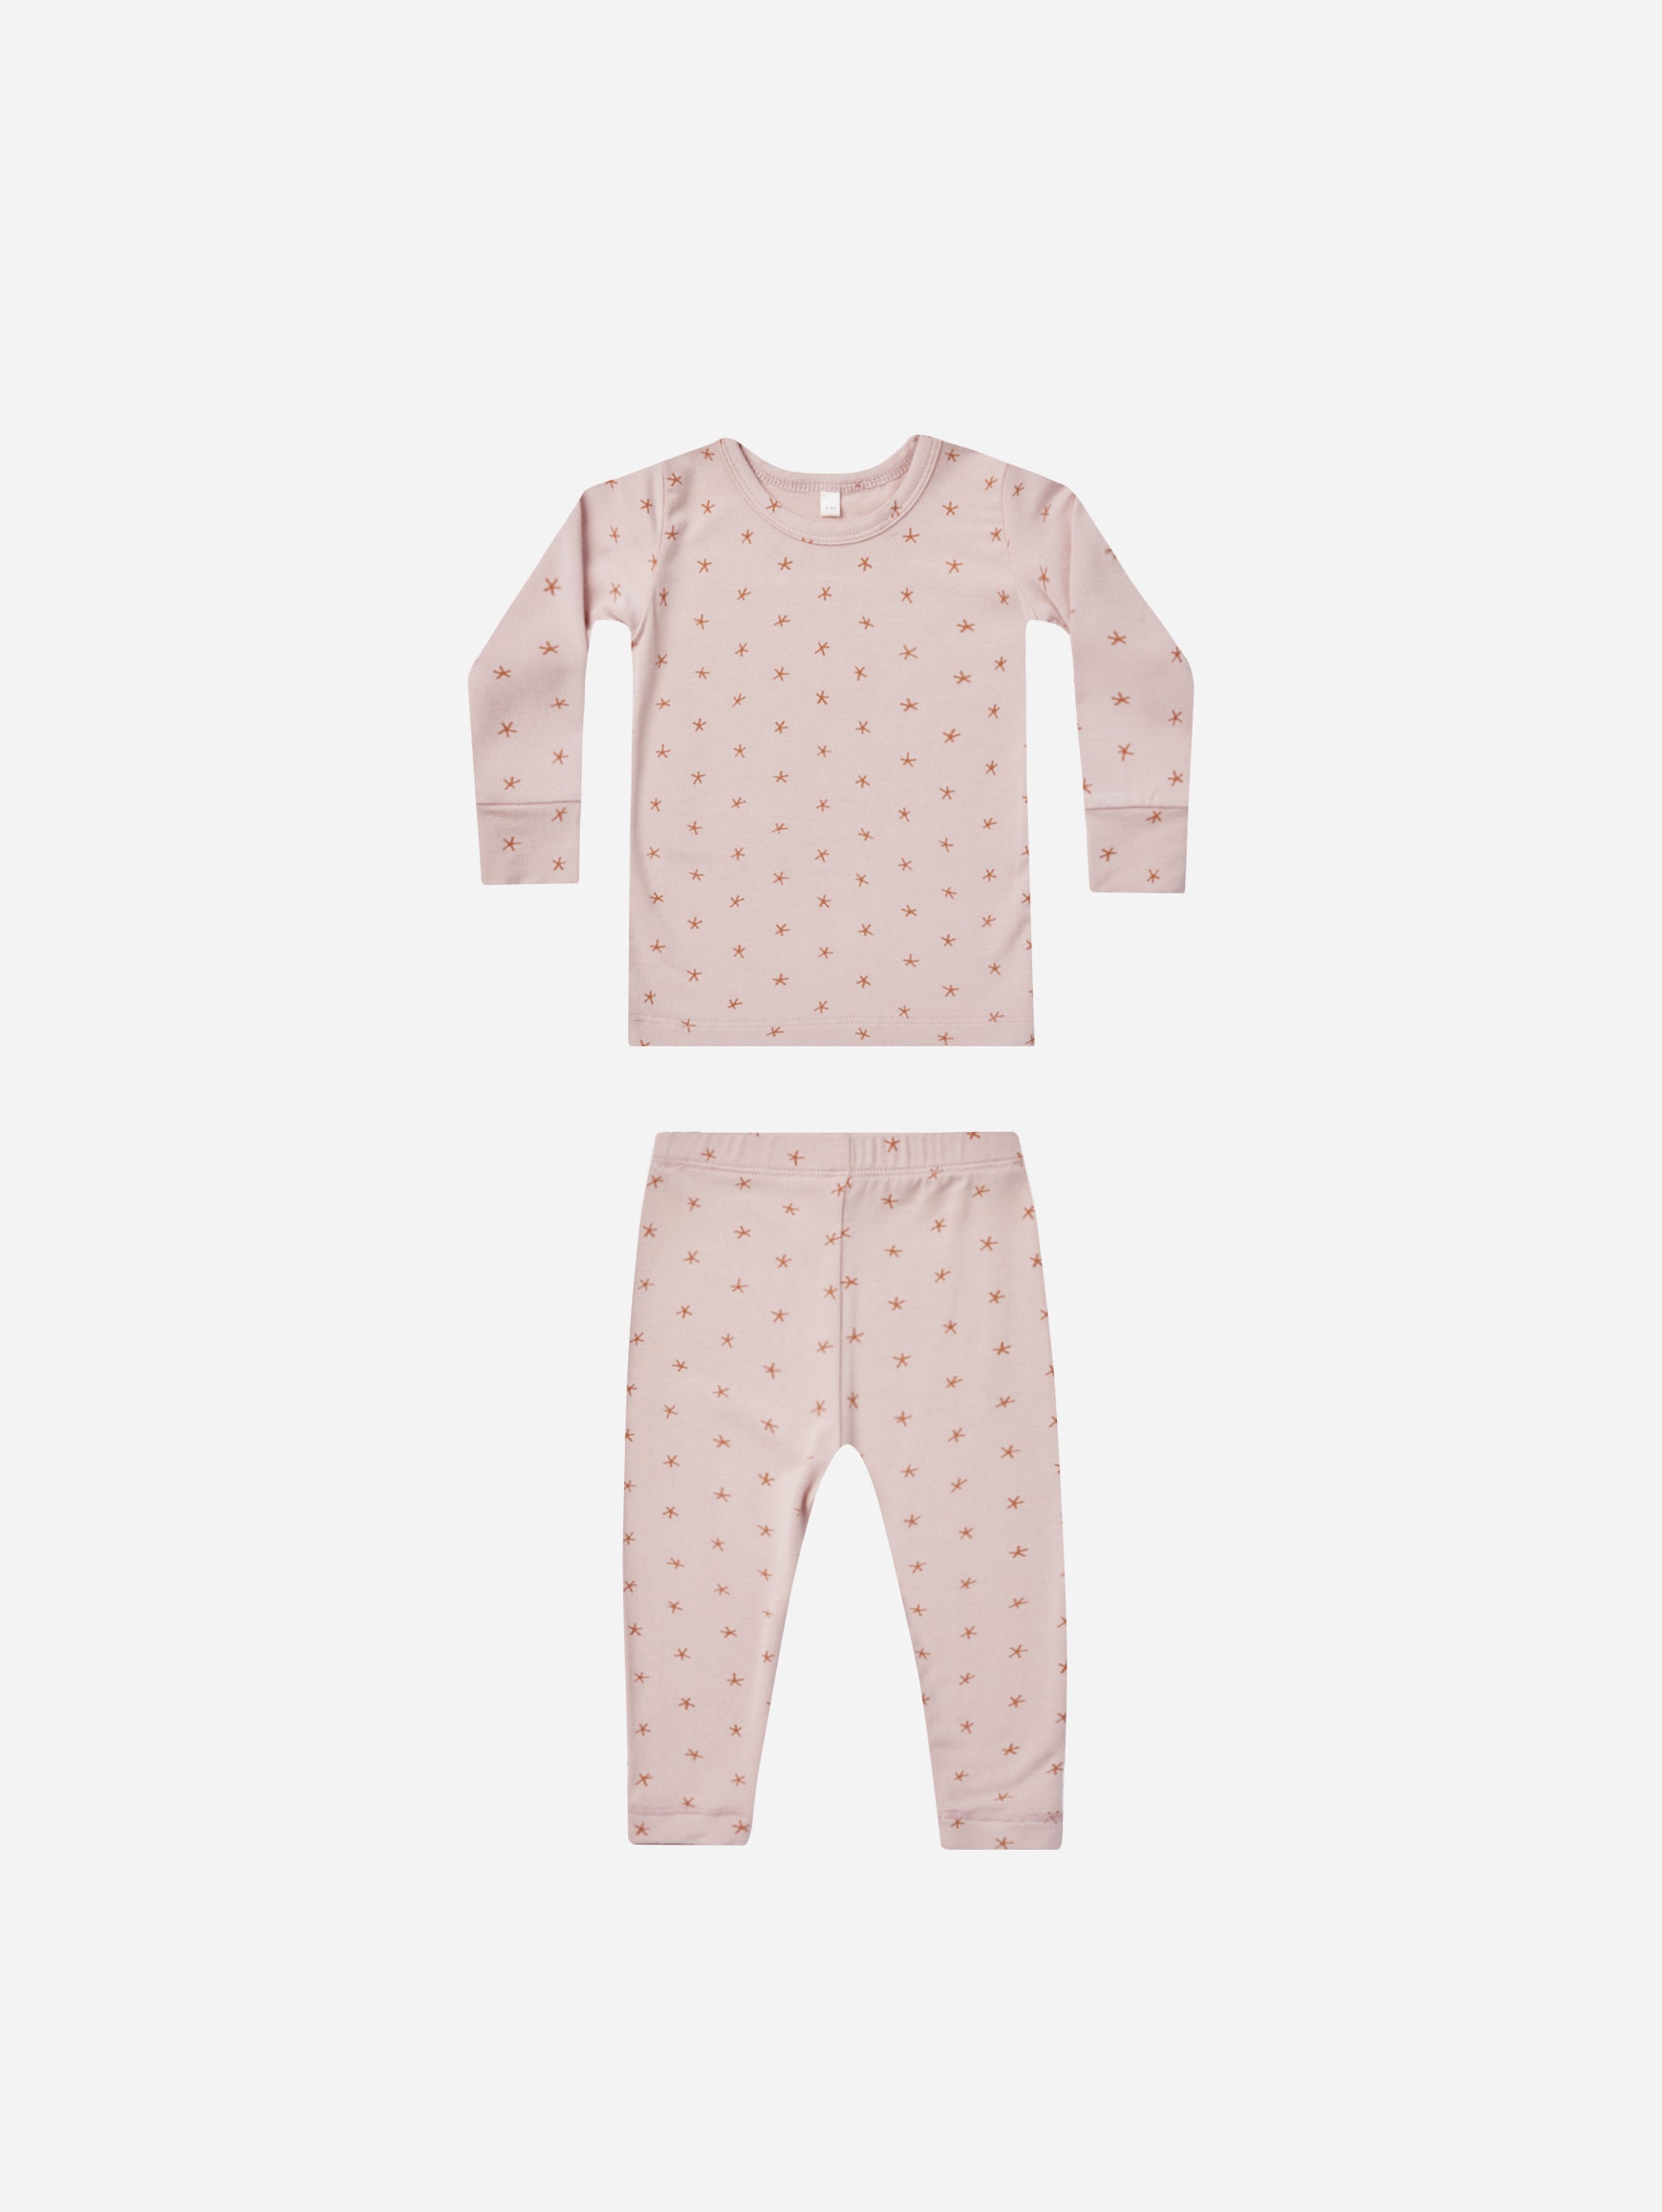 Bamboo Pajama Set || Twinkle SS24 - Rylee + Cru | Kids Clothes | Trendy Baby Clothes | Modern Infant Outfits |